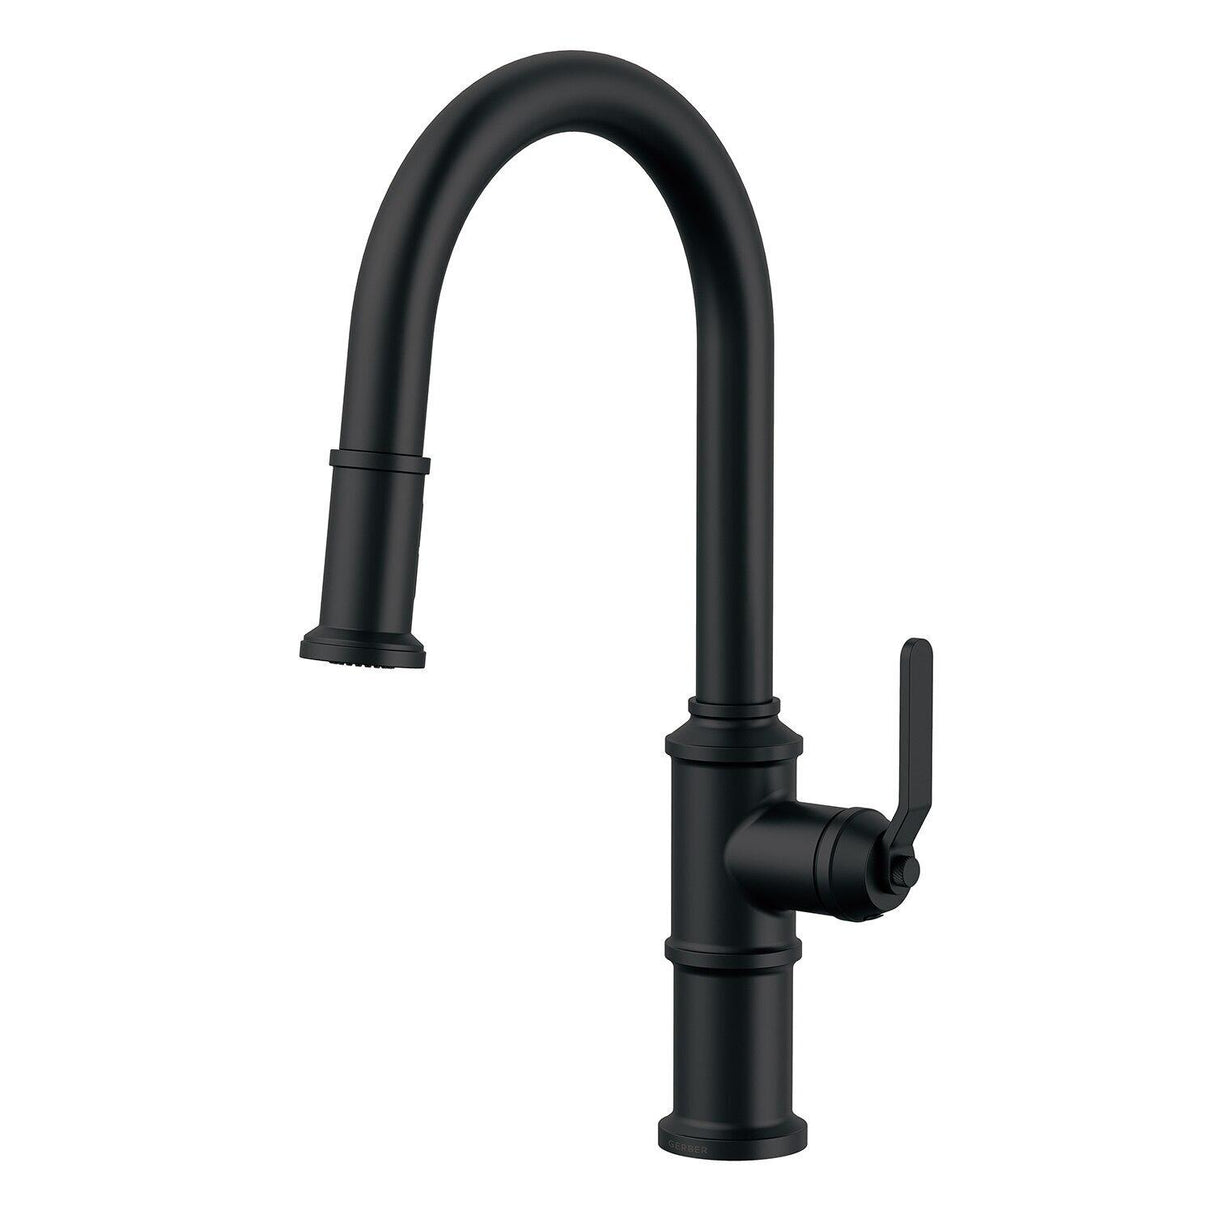 Gerber D454437BB Brushed Bronze Kinzie Single Handle Pull-down Kitchen Faucet